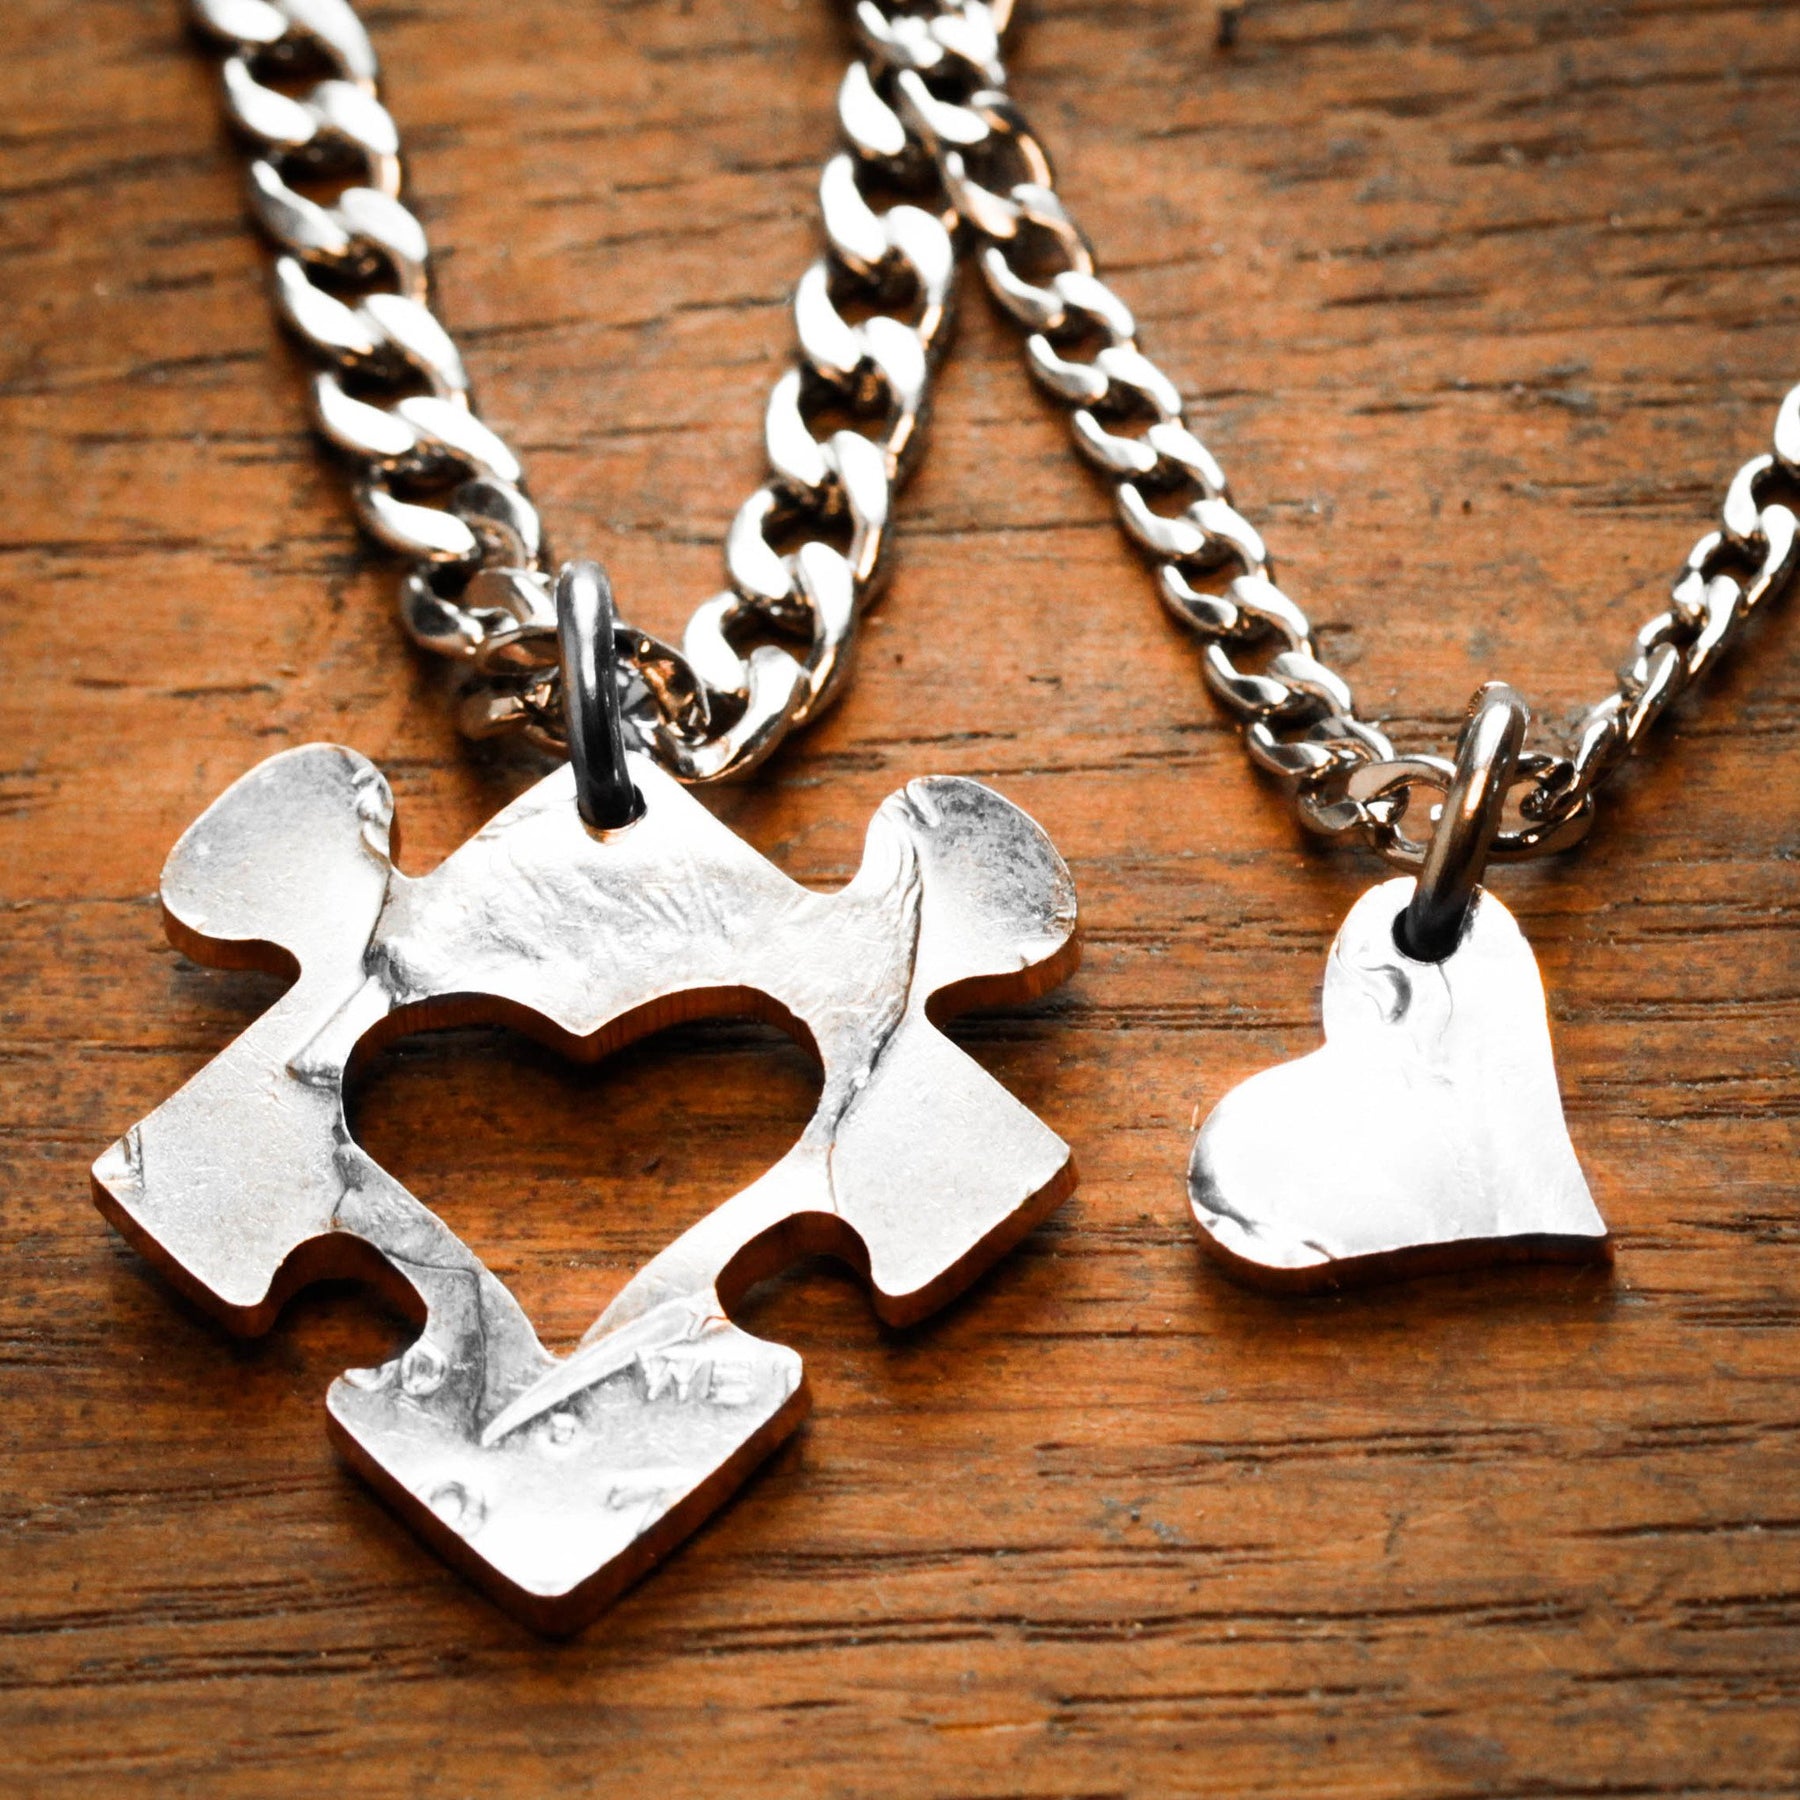 His & Hers Matching Set Titanium Stainless Steel Couple Pendant Necklace  Love Style in a Gift Box | Amazon.com